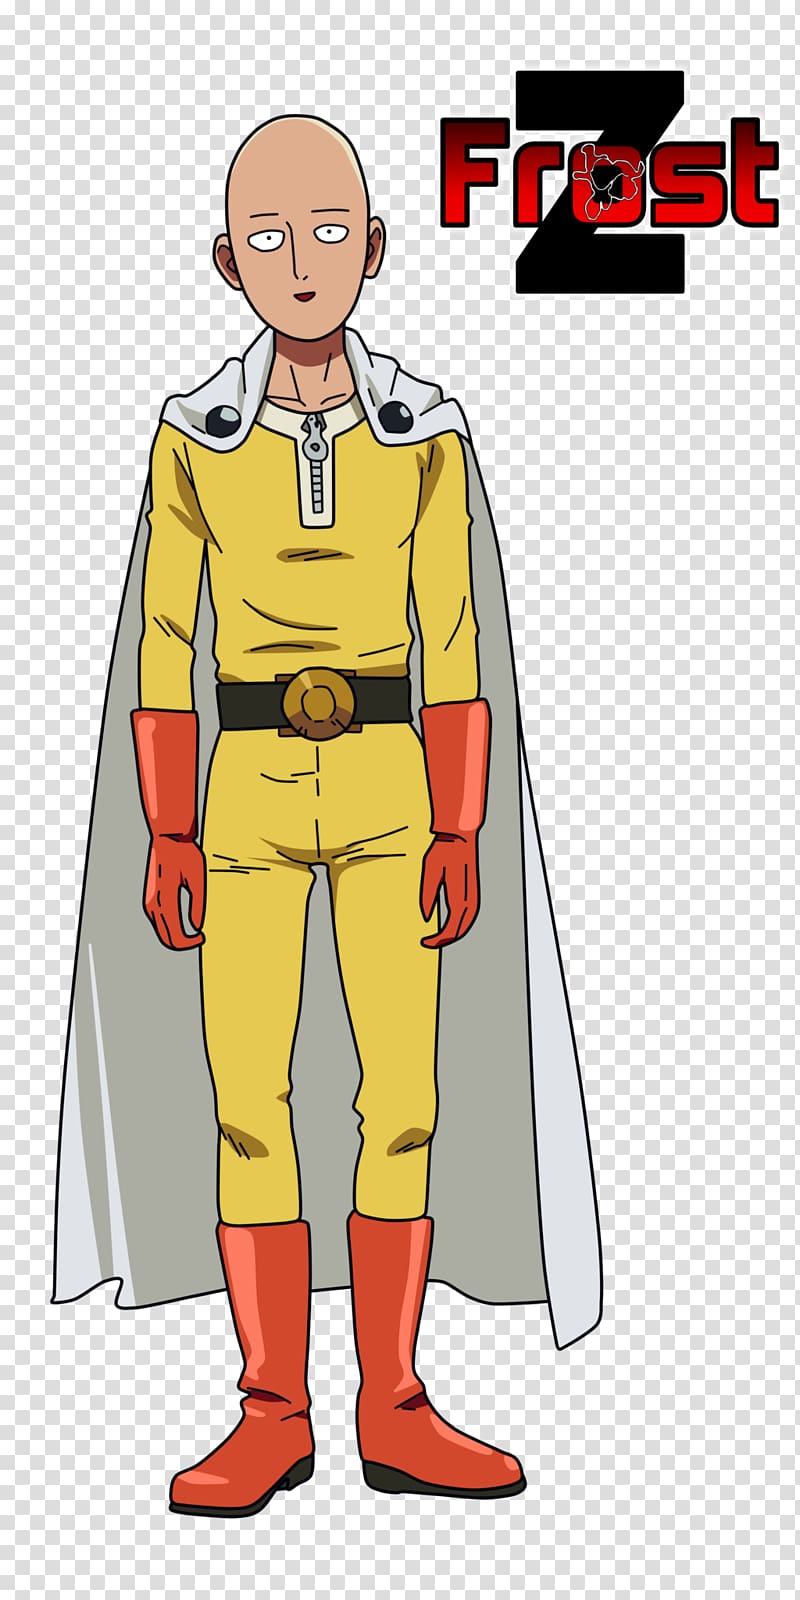 One Punch Man Cosplay Costume Saitama Clothing, one punch man transparent background PNG clipart